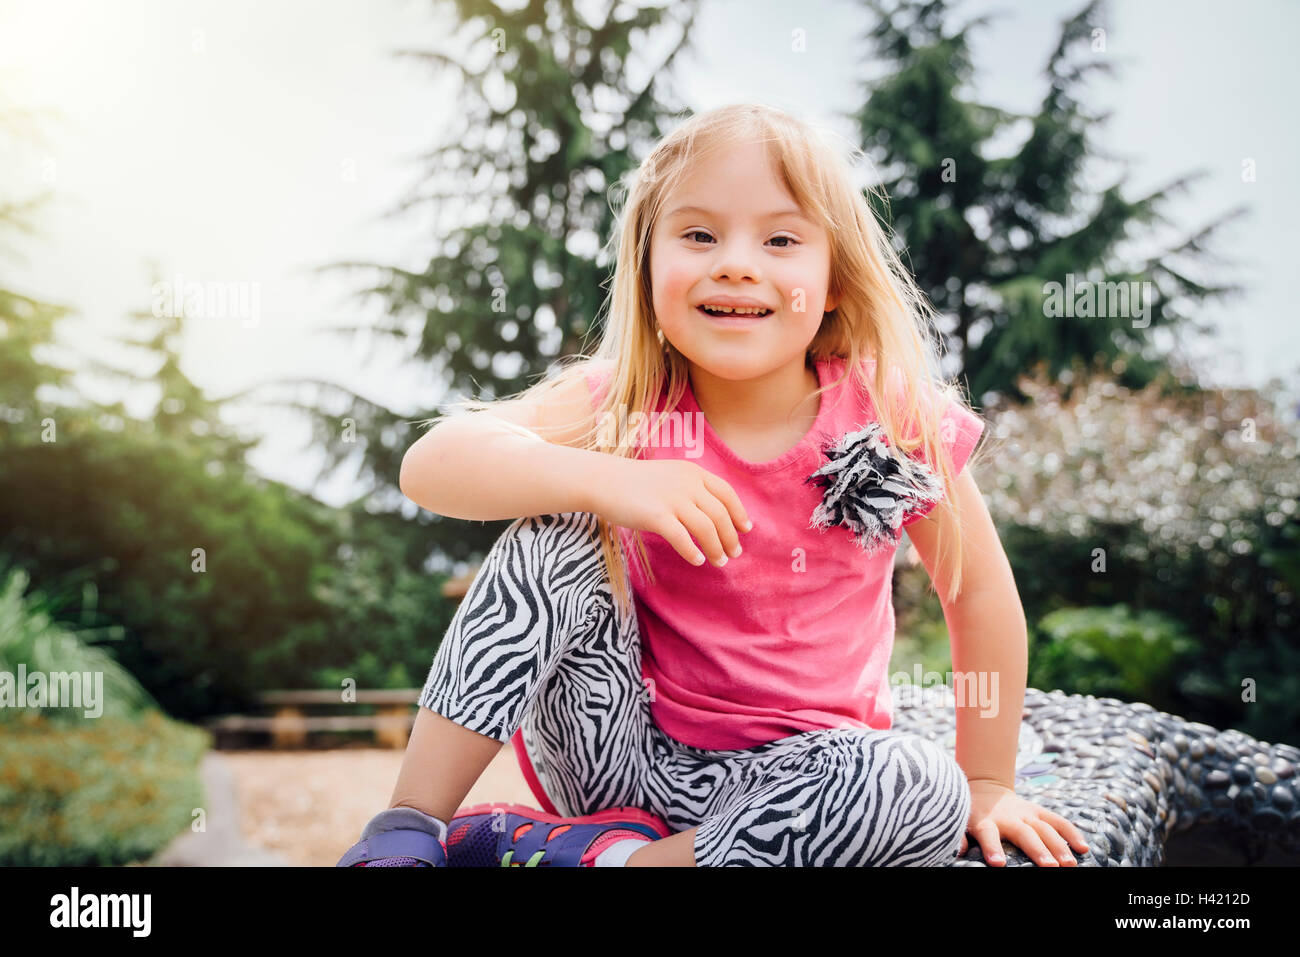 Smiling Mixed Race girl sitting on bench Banque D'Images